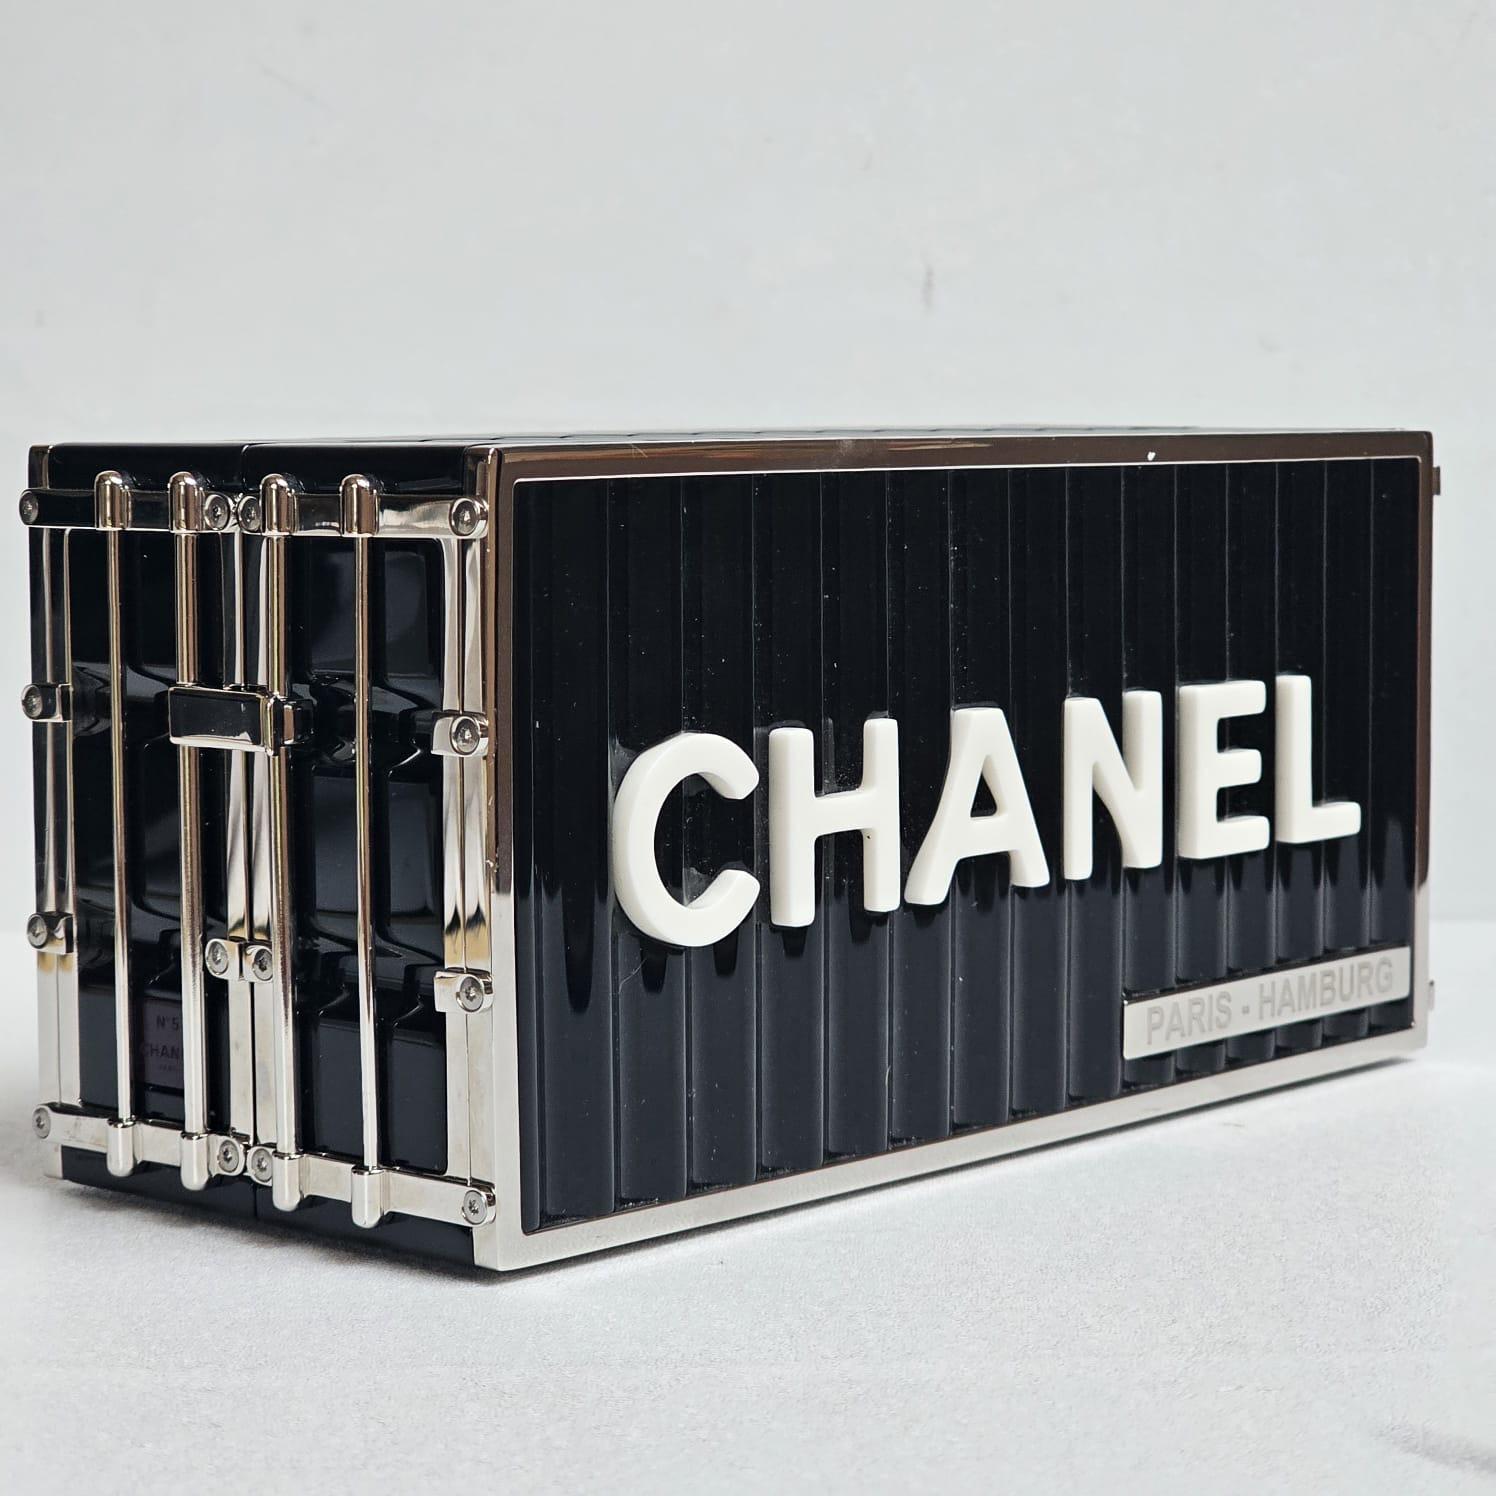 Rare Chanel Minaudiere Black Shipping Container Bag For Sale 11